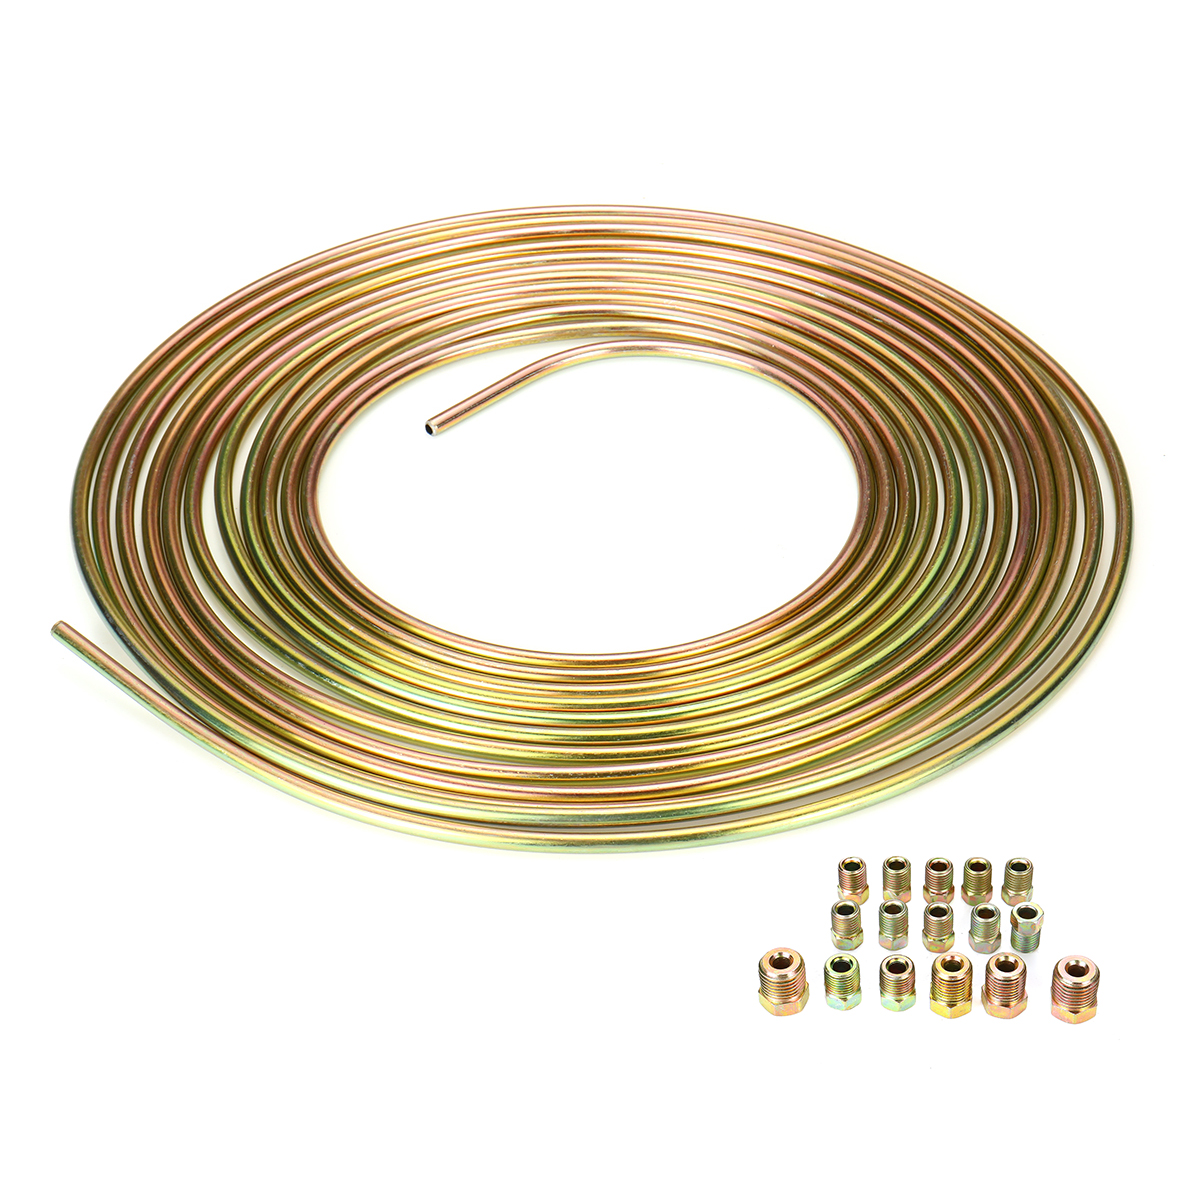 25ft-Roll-of-316-Plated-Brake-Line-Tubing-OD-Copper-Nickel-With-16x-Tube-Nuts-1686126-3